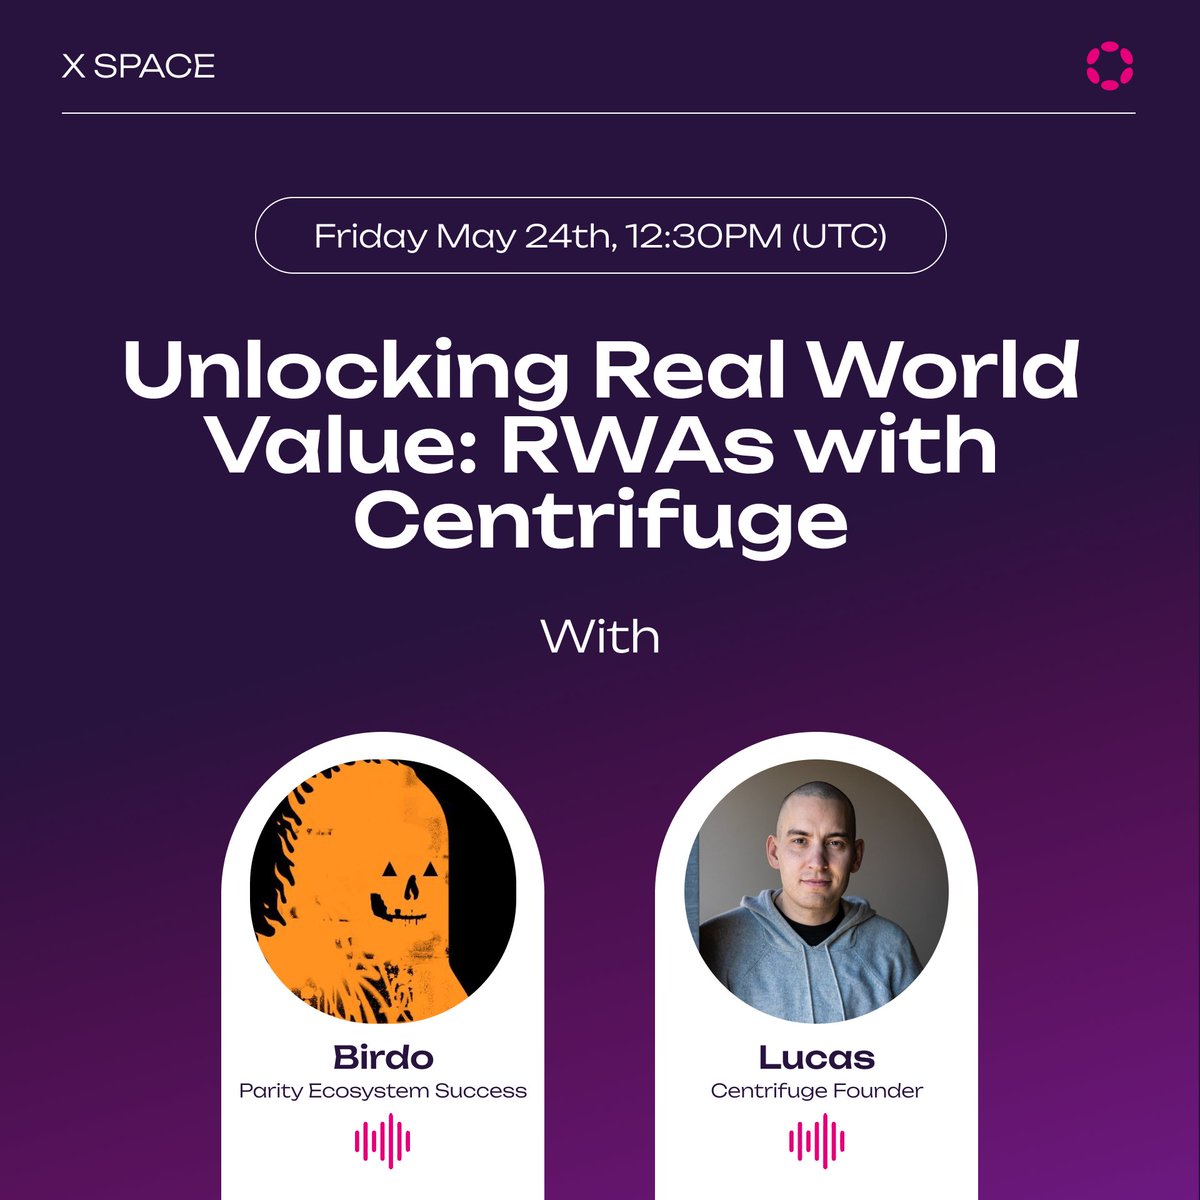 💭 RWAs (Real World Assets) refers to tokenized physical or digital assets such as real estate, commodities and Treasury bills.

🎙️ Join Friday's 𝕏 Space w/ @itsbirdo_ and @lucasvo, co-founder & CEO of @centrifuge, to learn how RWAs enable greater efficiency in markets.